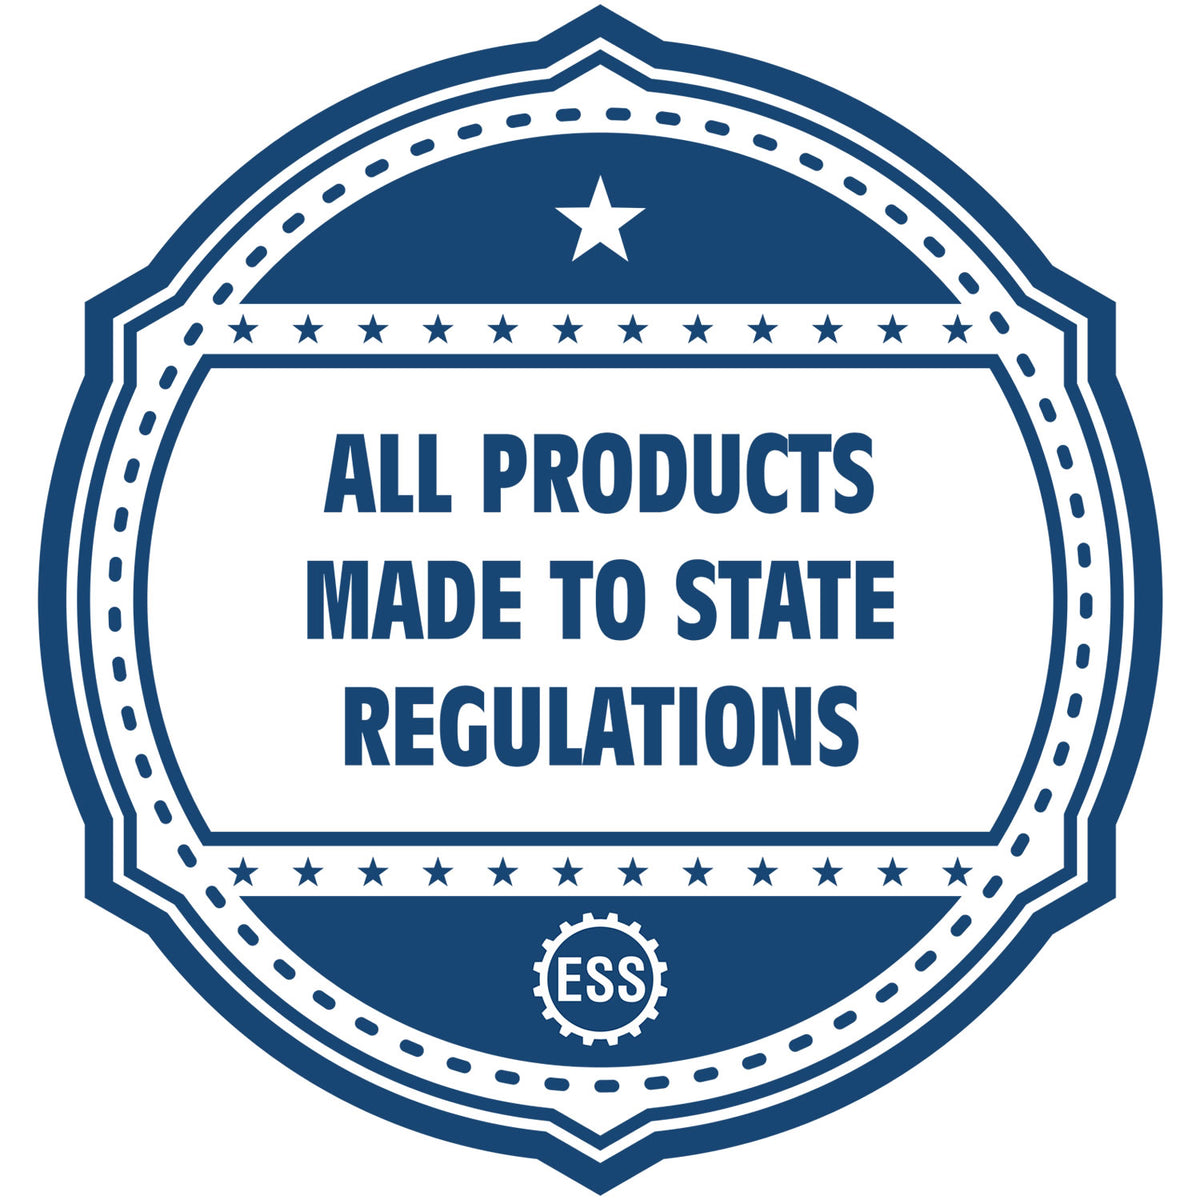 An icon or badge element for the Premium MaxLight Pre-Inked Indiana Engineering Stamp showing that this product is made in compliance with state regulations.